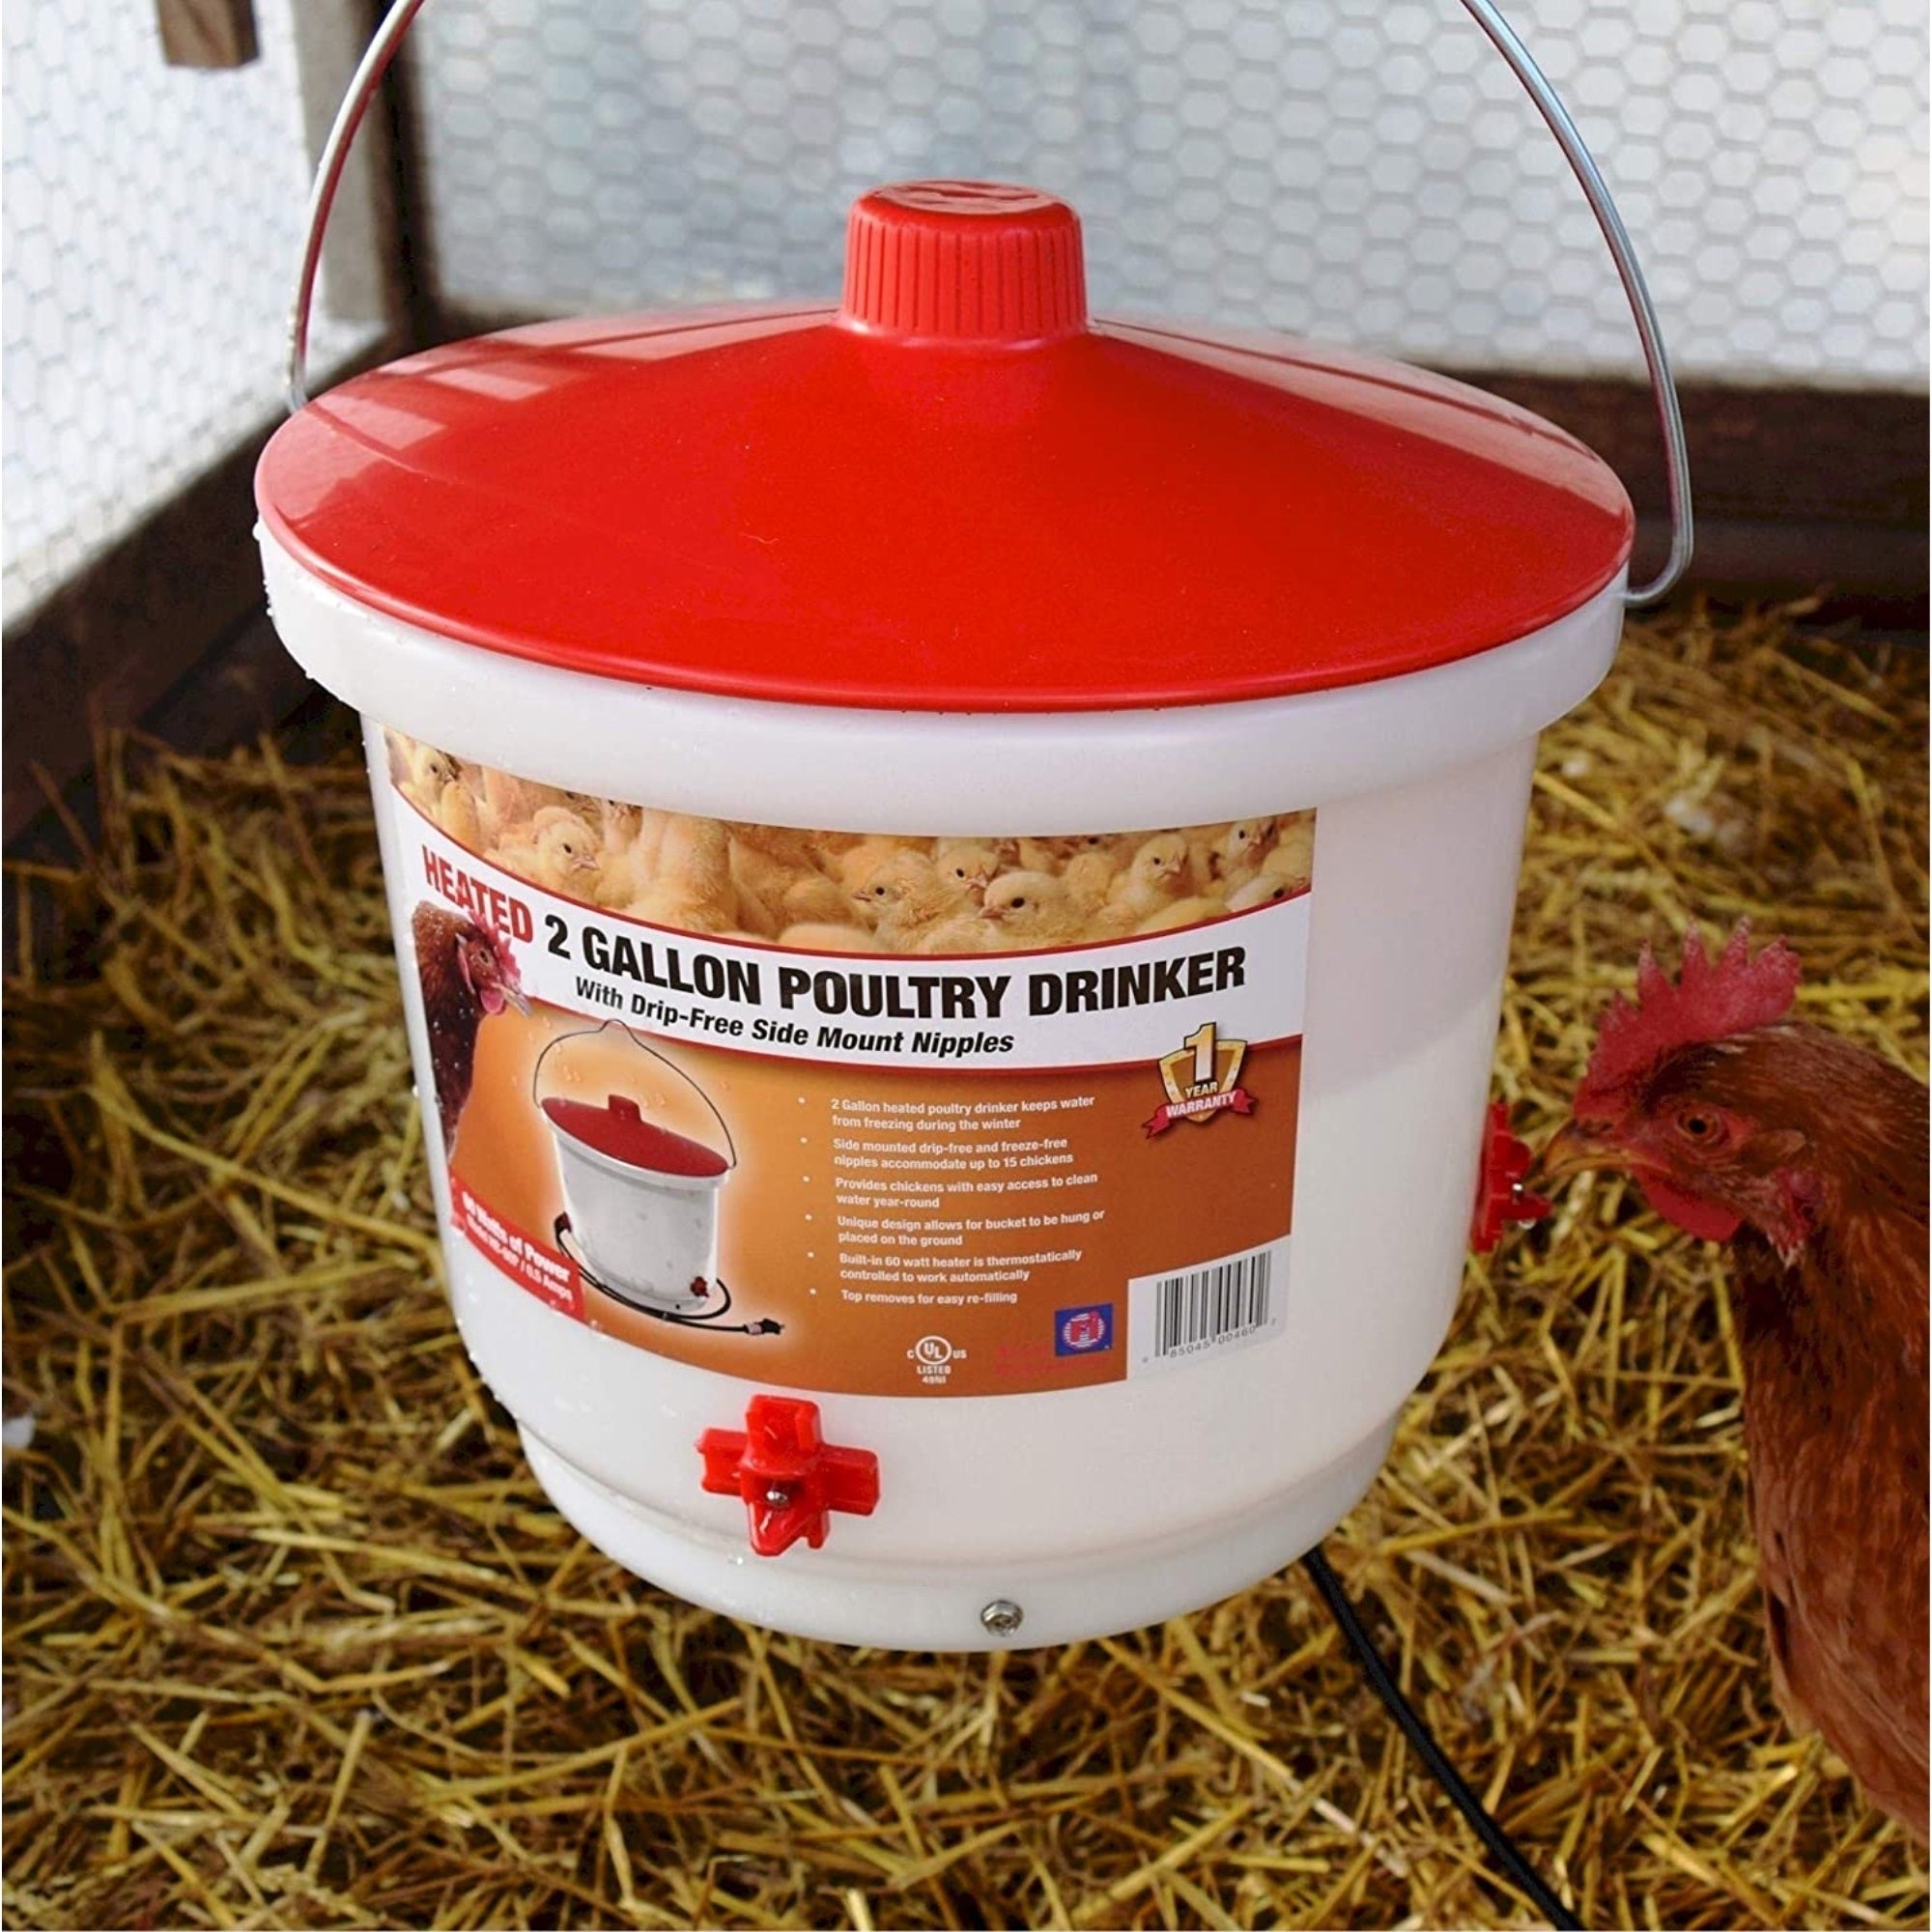 Farm Innovators Heated Poultry Drinker with Drip-Free Side Mount Nipples, 2 Gallons